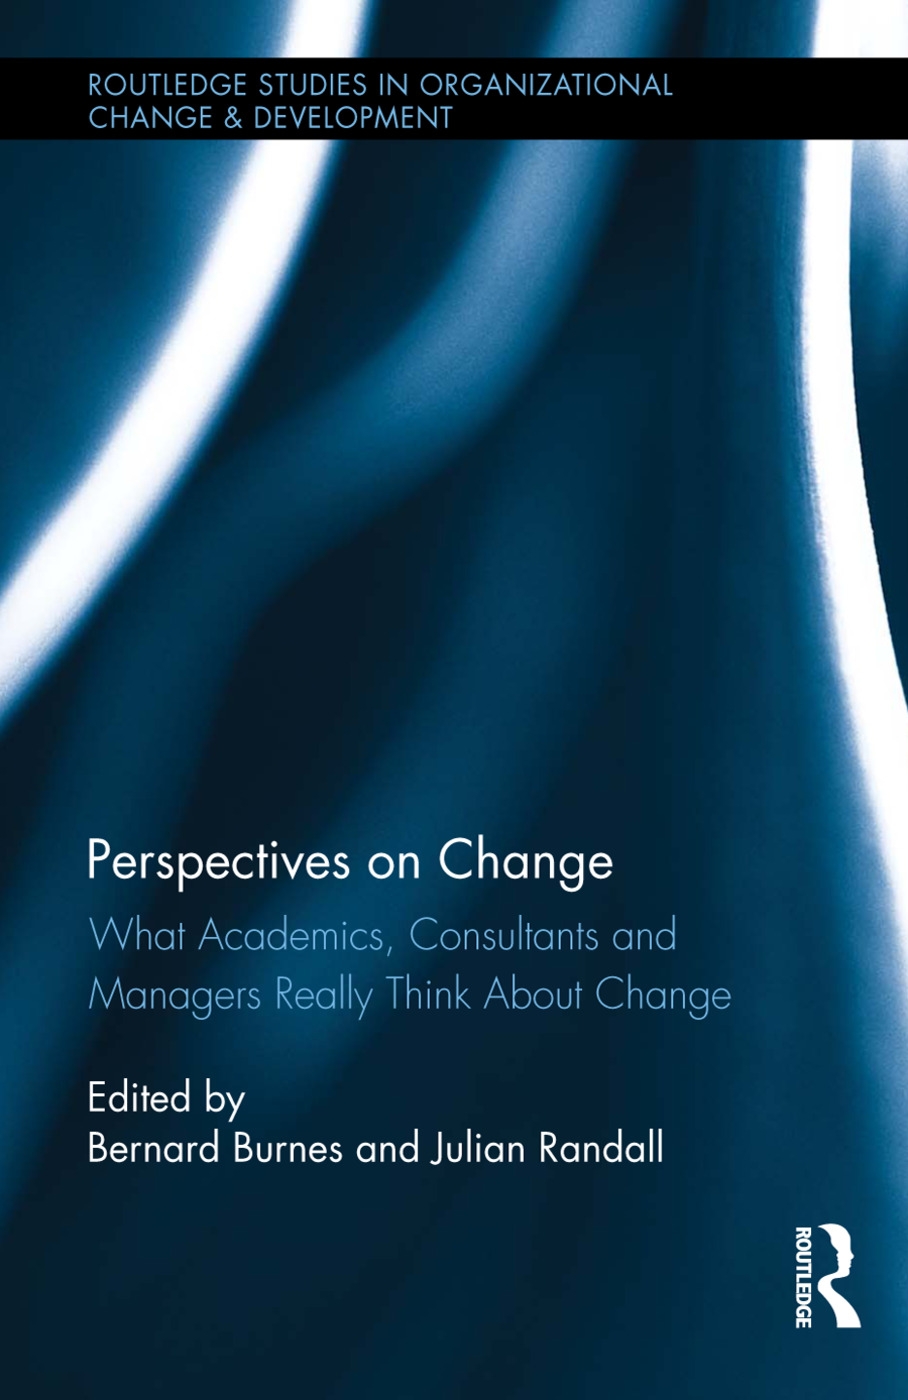 Perspectives on Change: What Academics, Consultants and Managers Really Think about Change